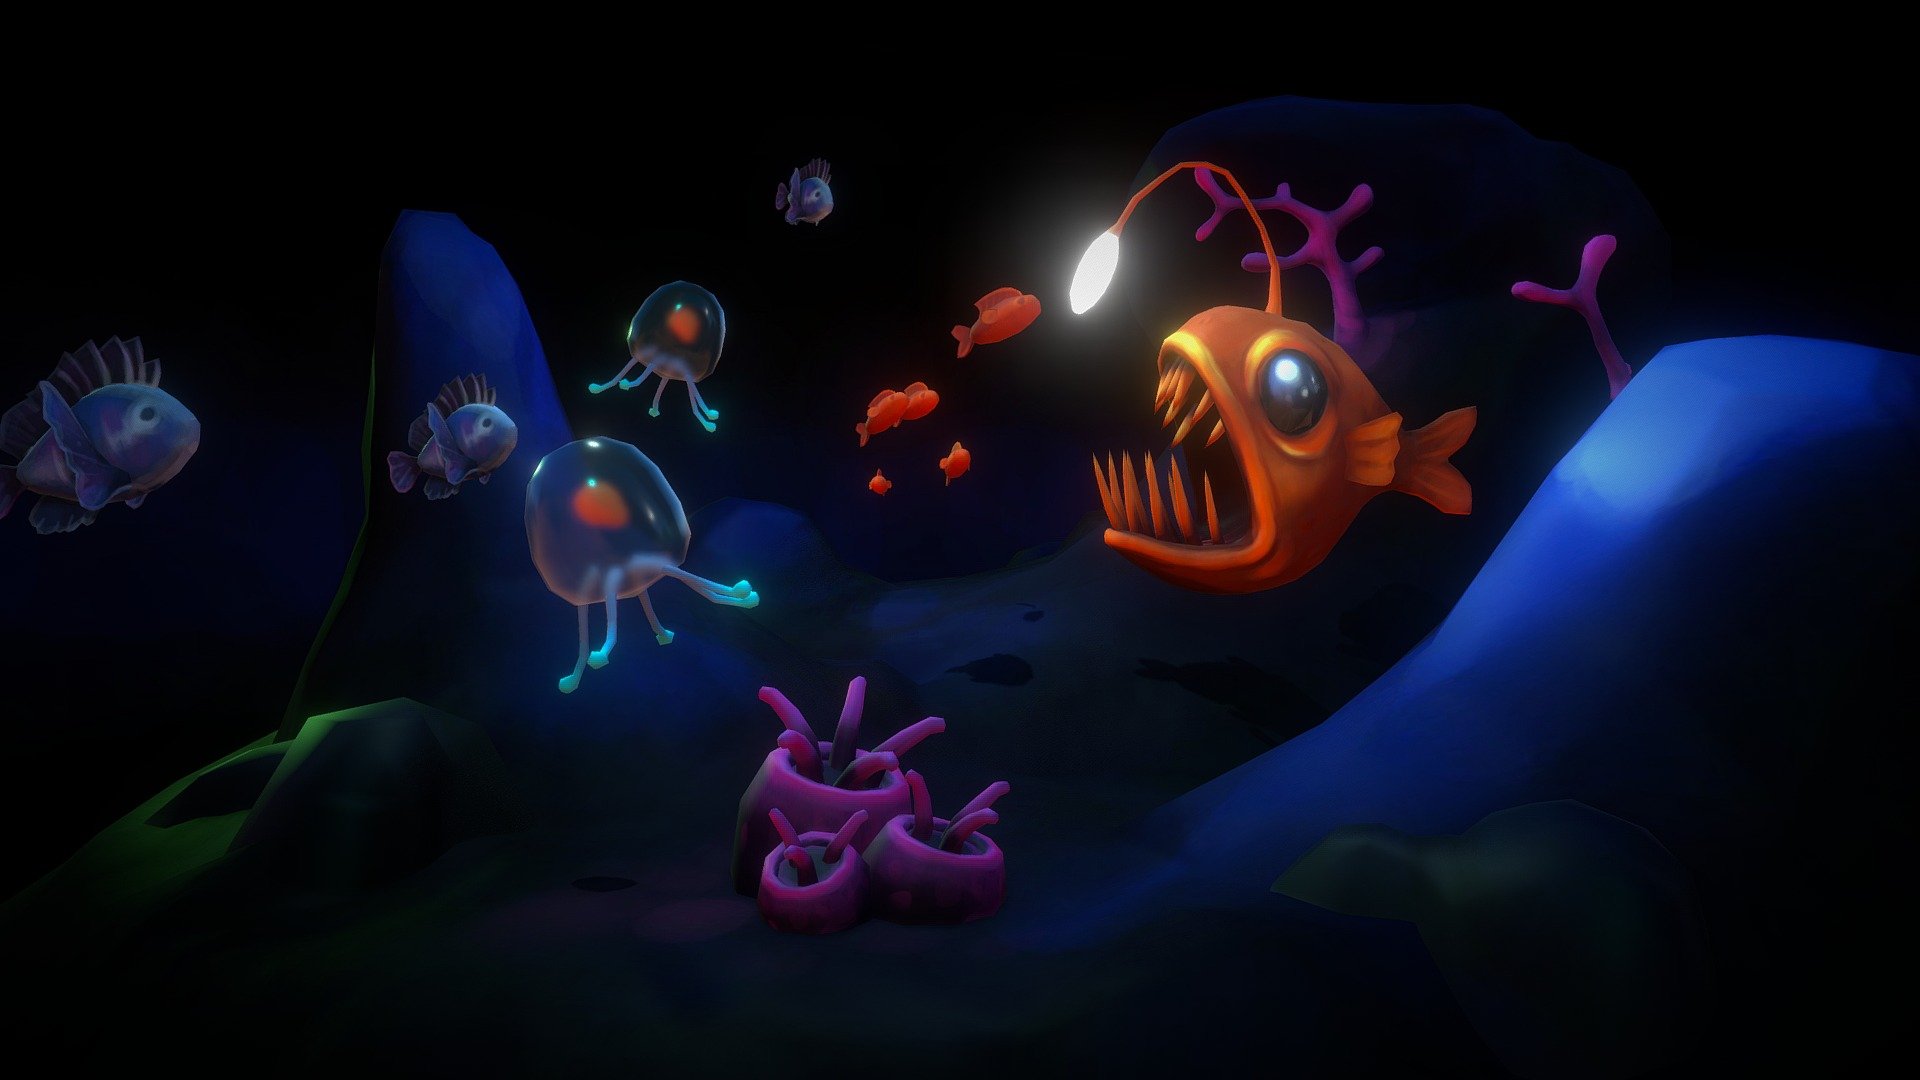 My entry for the low poly sea life challenge. I decided to go for a stylized deep sea scene and play with lighting a lot more than my other work. This was made in Maya, ZBrush,3DCoat and Photoshop
Right now the tri count is 16k out of the 25K limit for the challenge so I may keep adding to it before the contest ends - Low Poly Deep Sea - 3D model by rosiejarvis 3d model